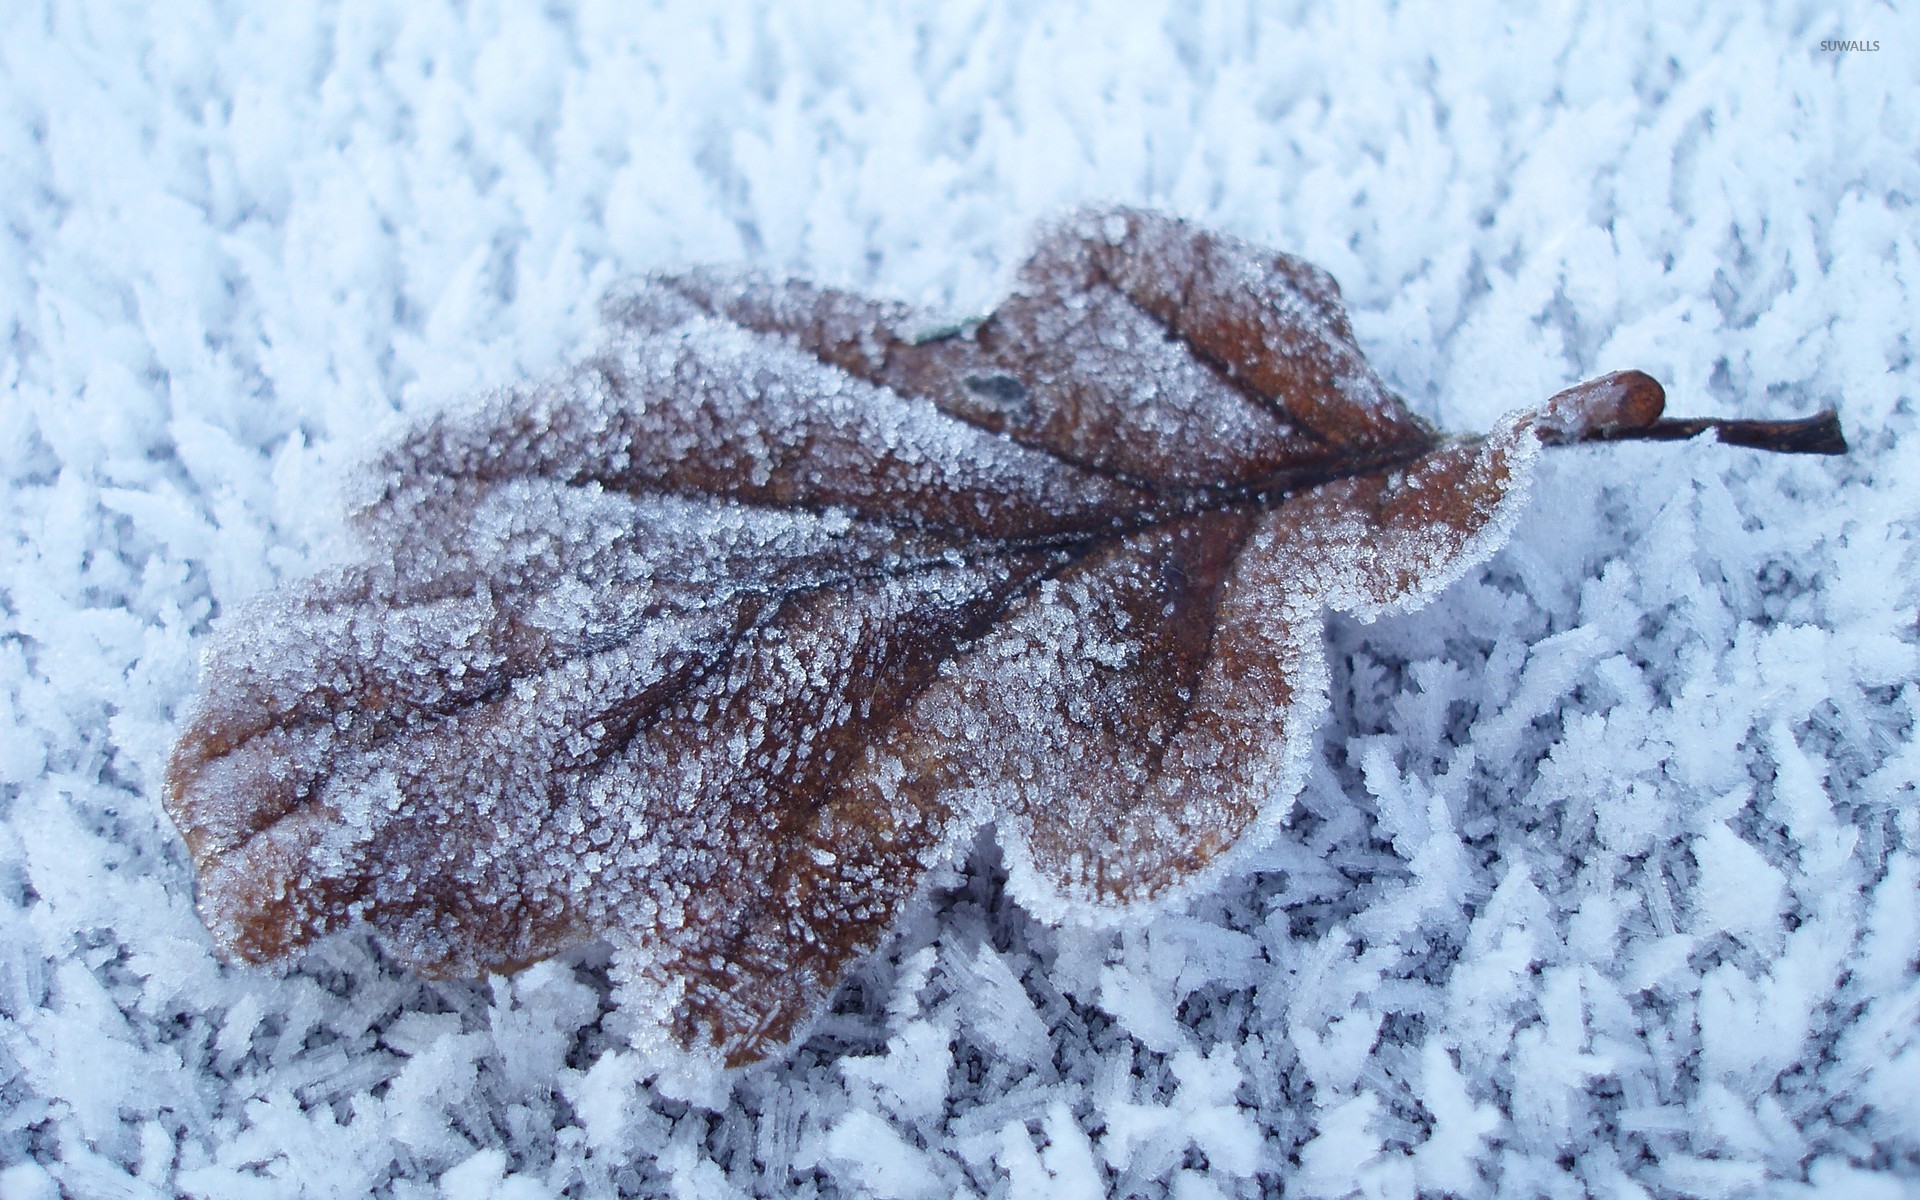 Frozen leaf wallpaper - Photography wallpapers - #24967